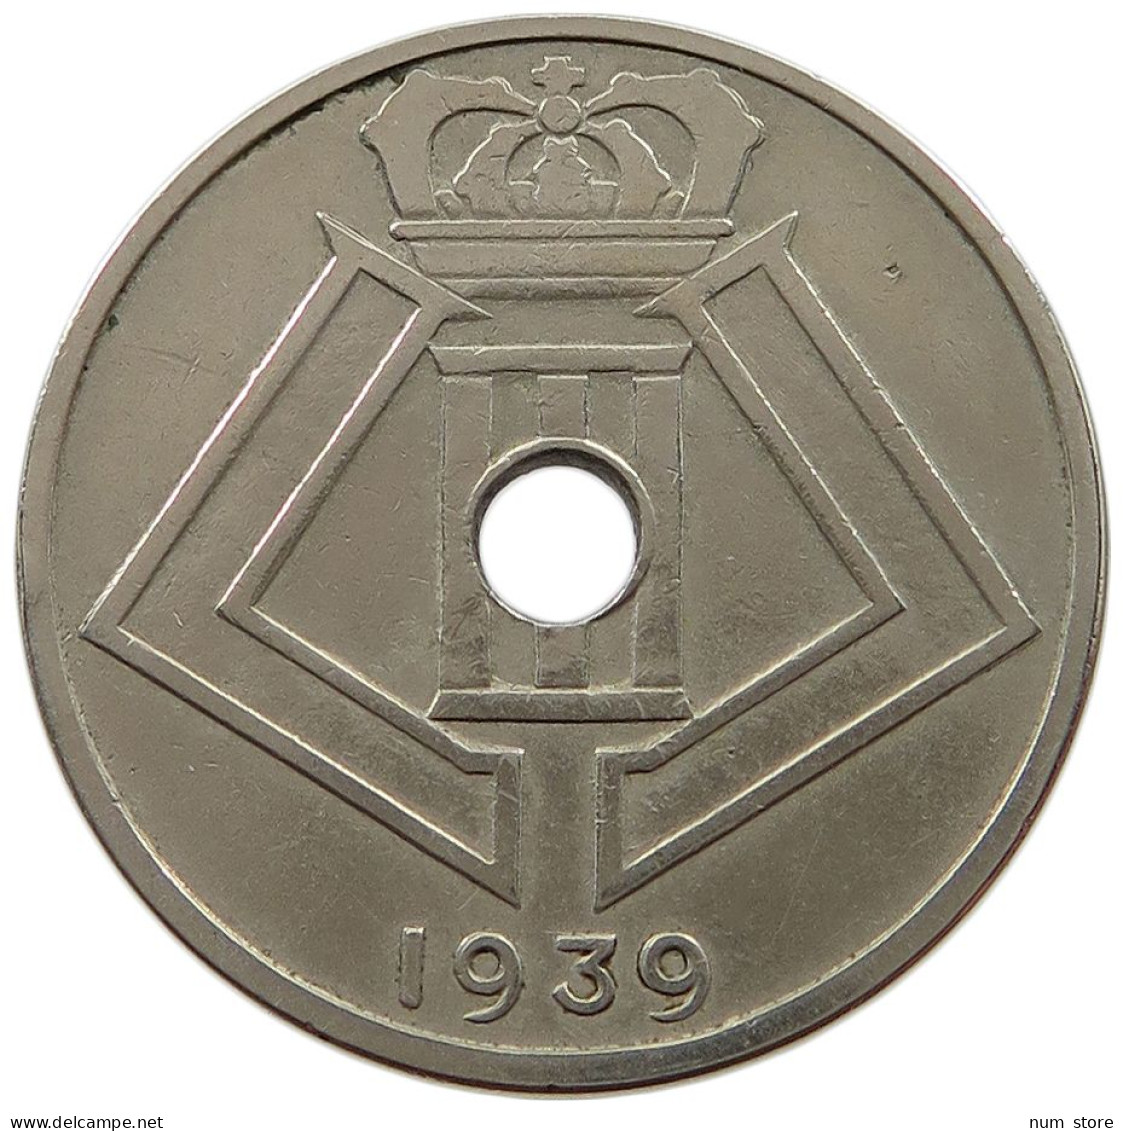 BELGIUM 25 CENTIMES 1939 MINTING ERROR MEDAL ALIGNMENT 25 CENTIMES 1939 #t065 0183 - 25 Cents